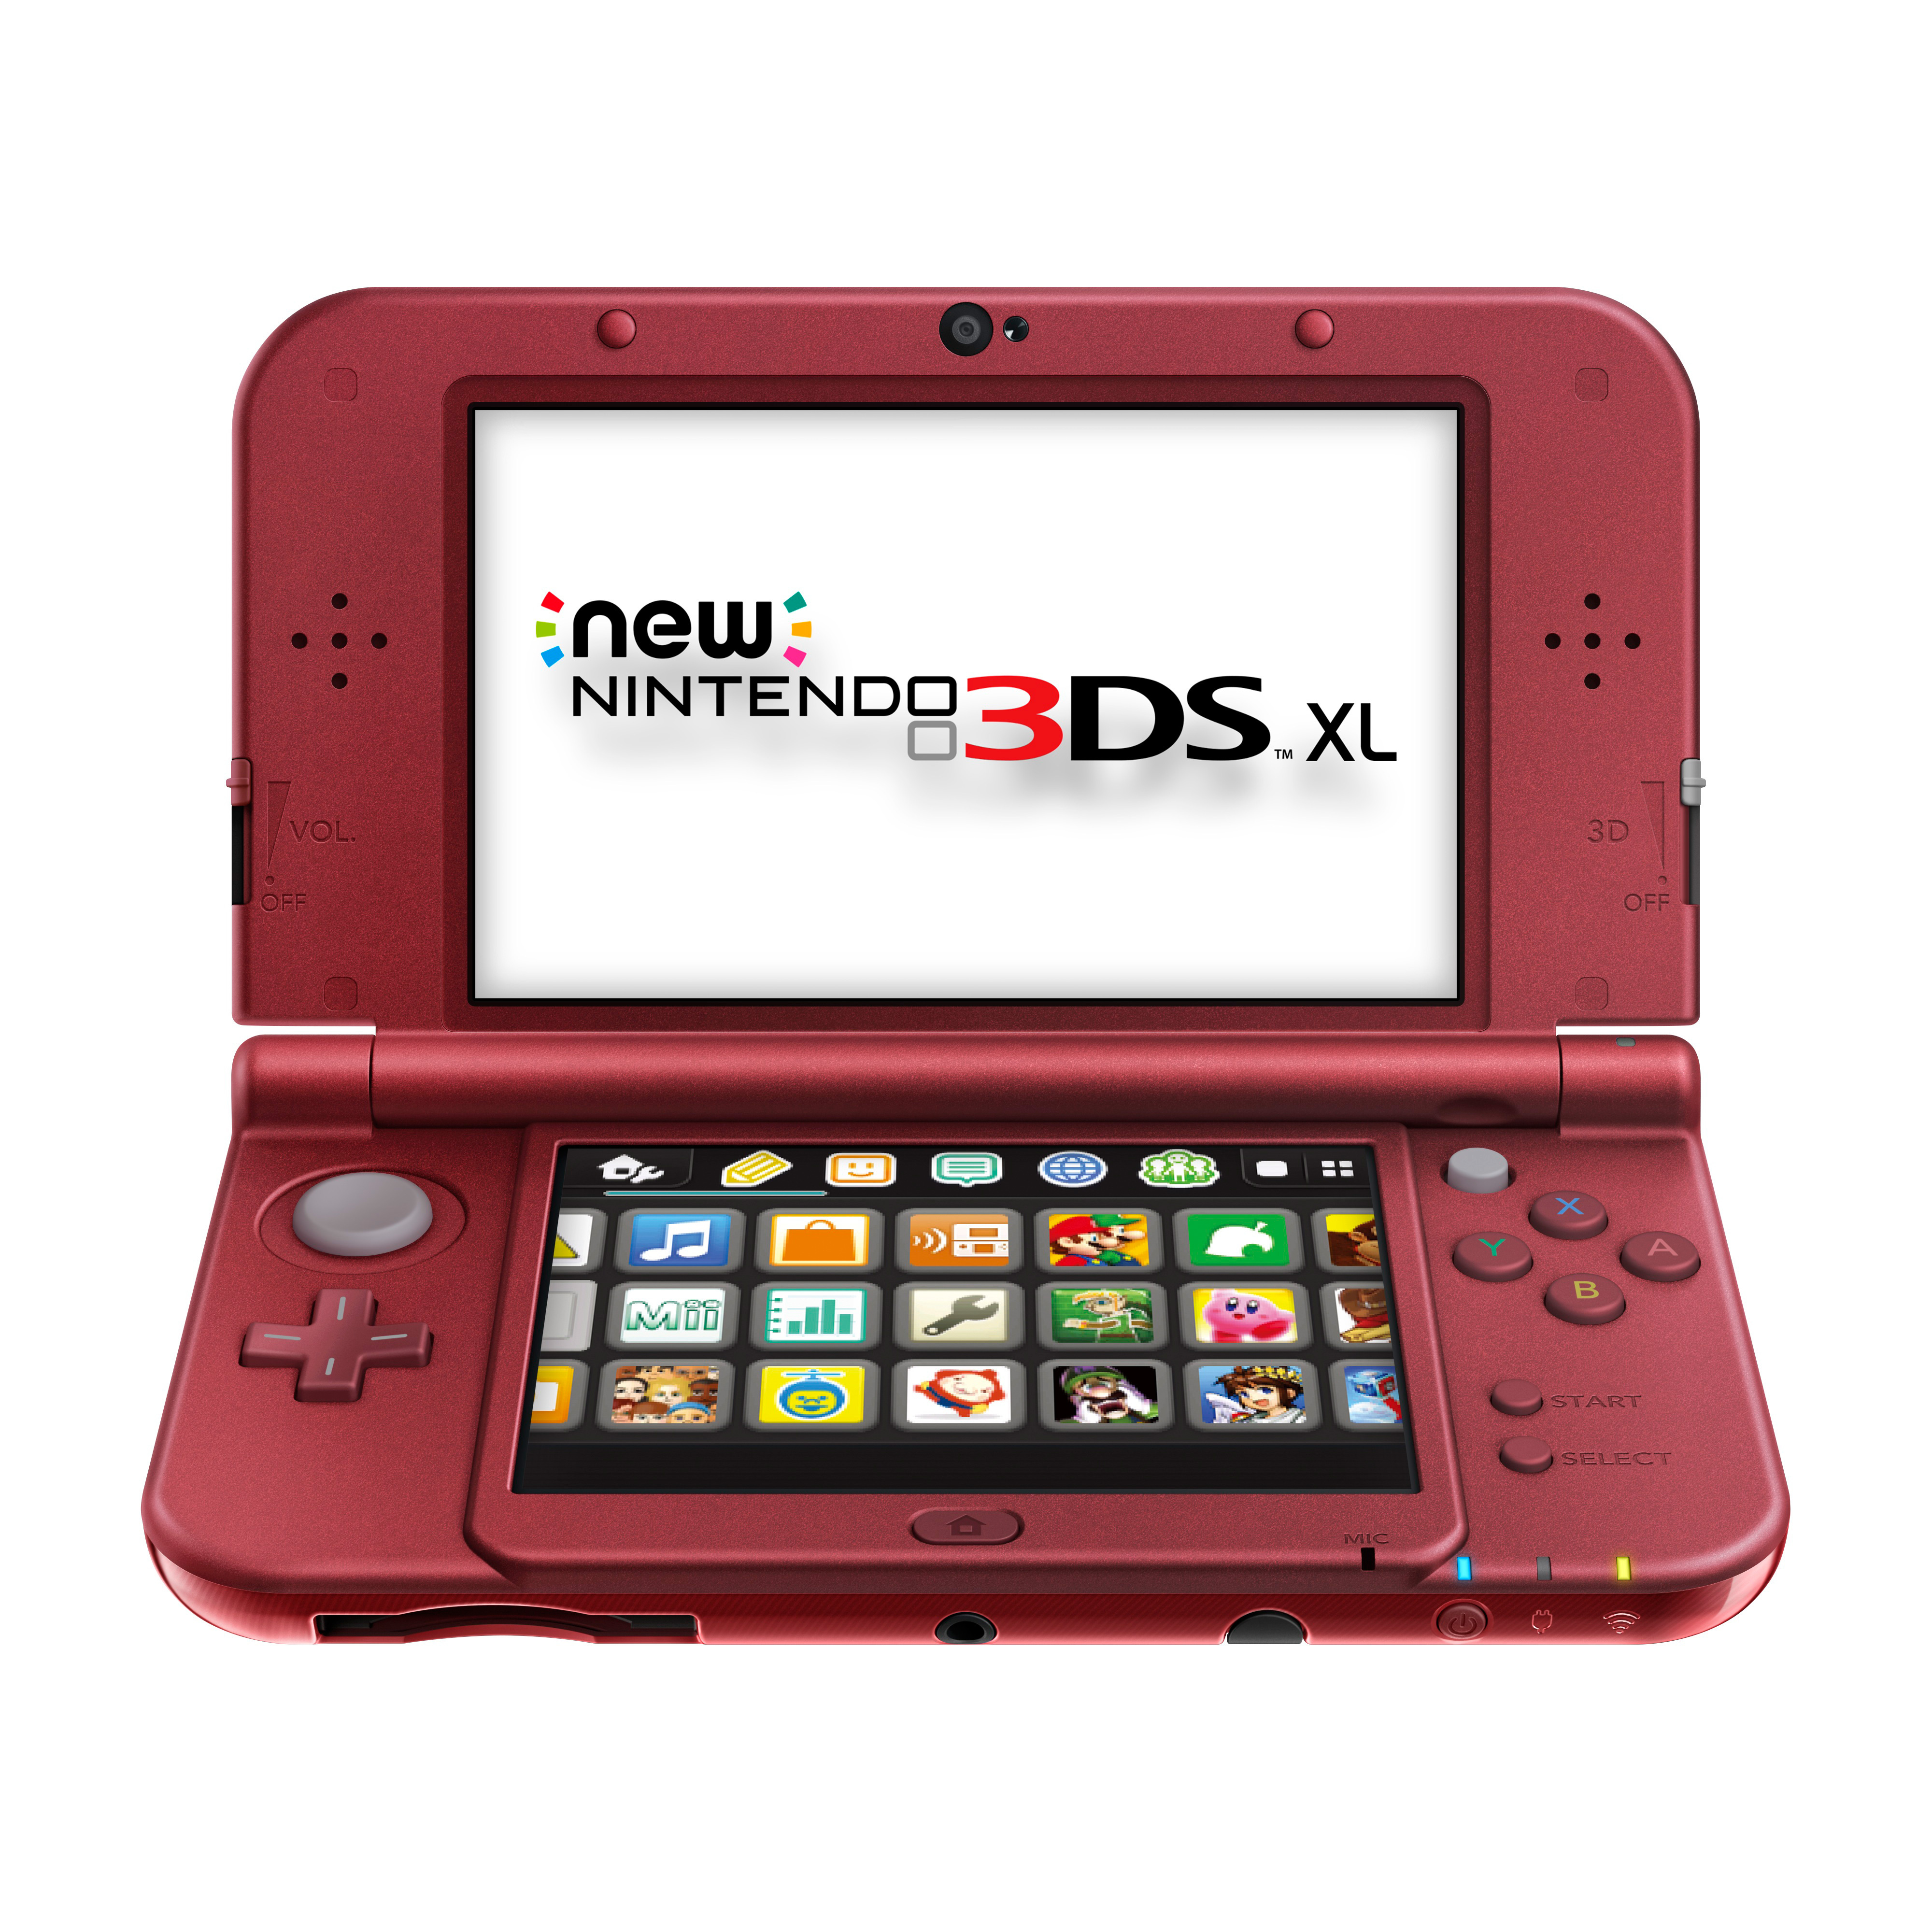 New Nintendo 3DS XL Launches in the U.S 